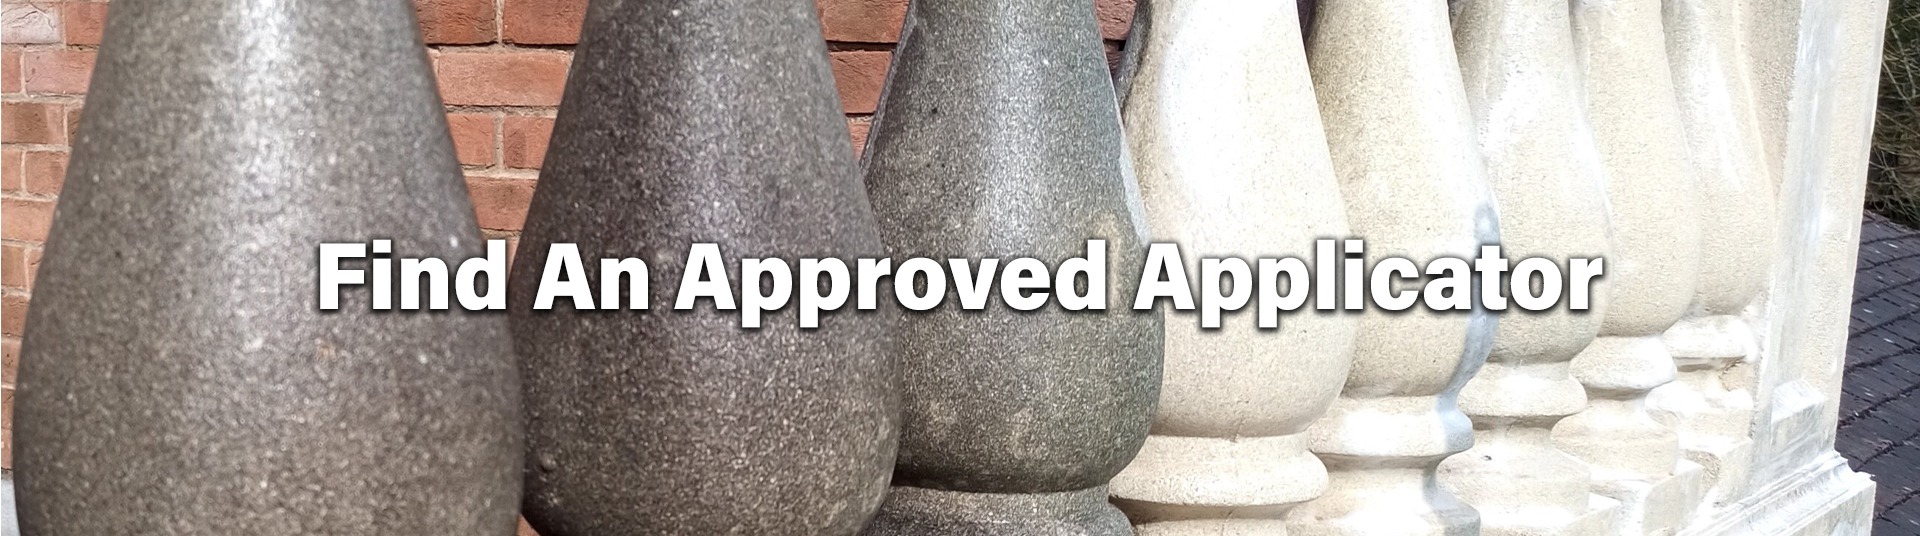 Find An Approved Applicator